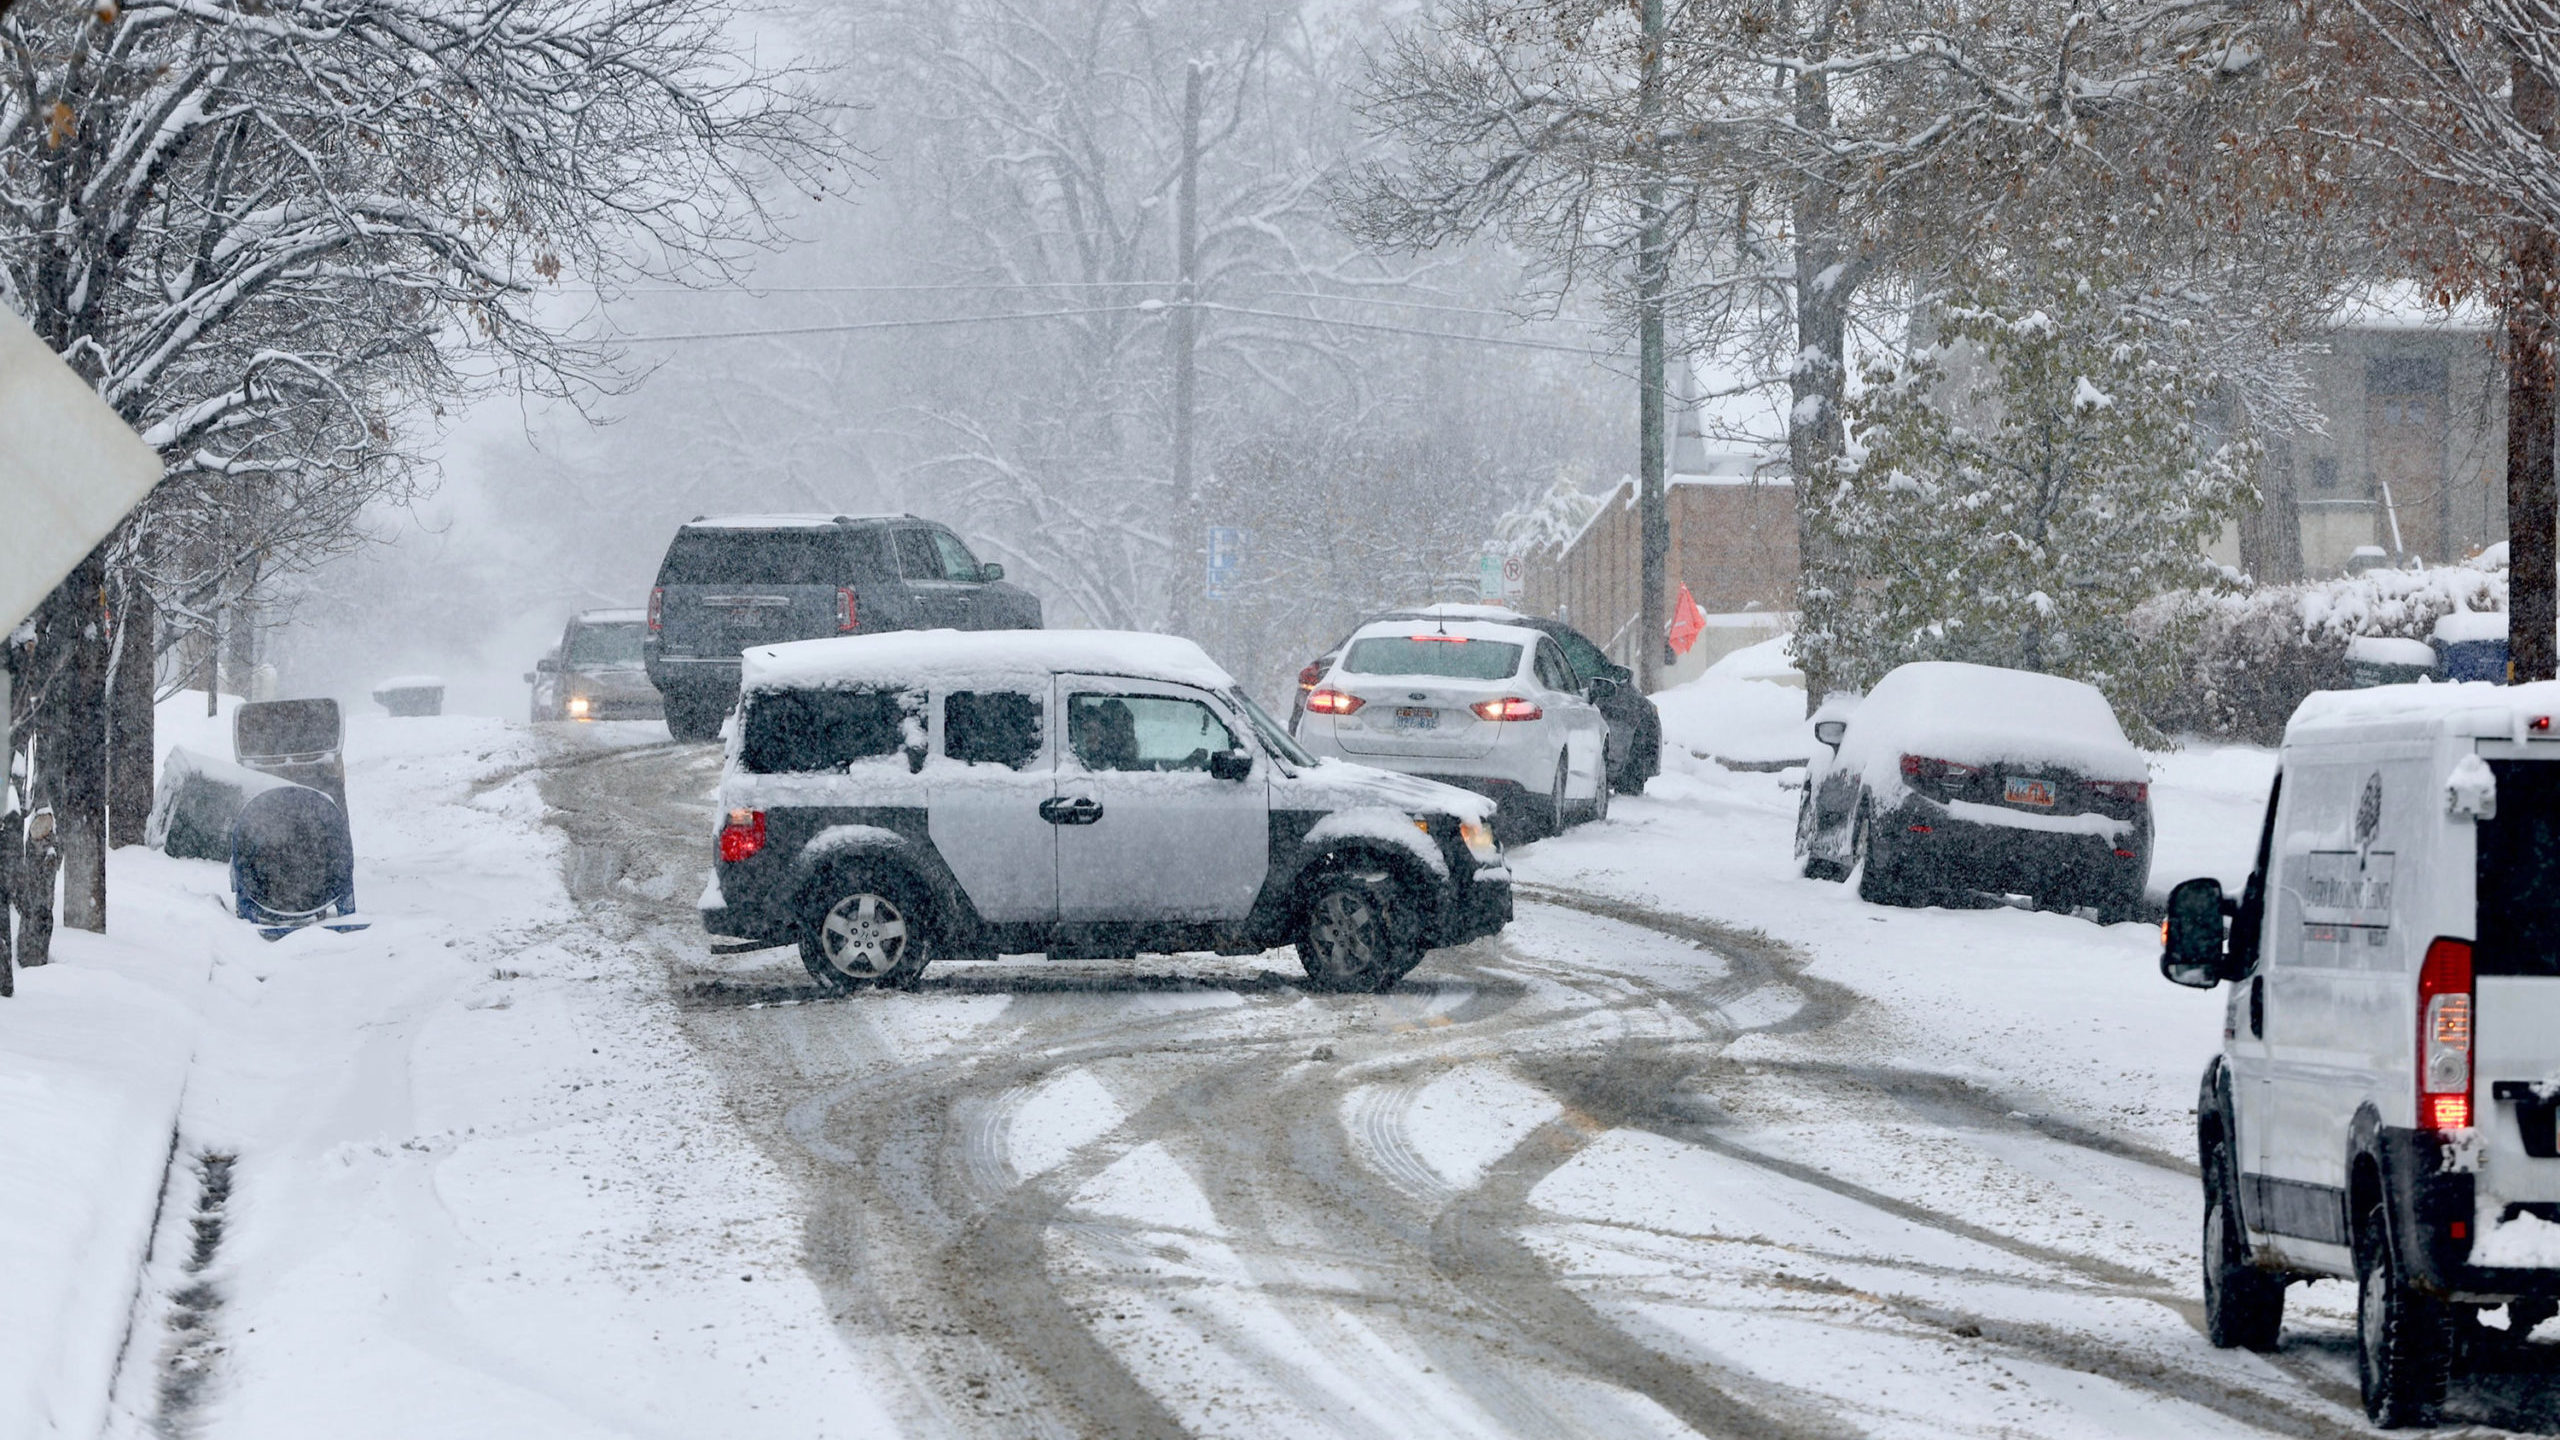 Cars spinning out on a snowy Utah road. Preparing your vehicle for winter helps keep Utah roads saf...